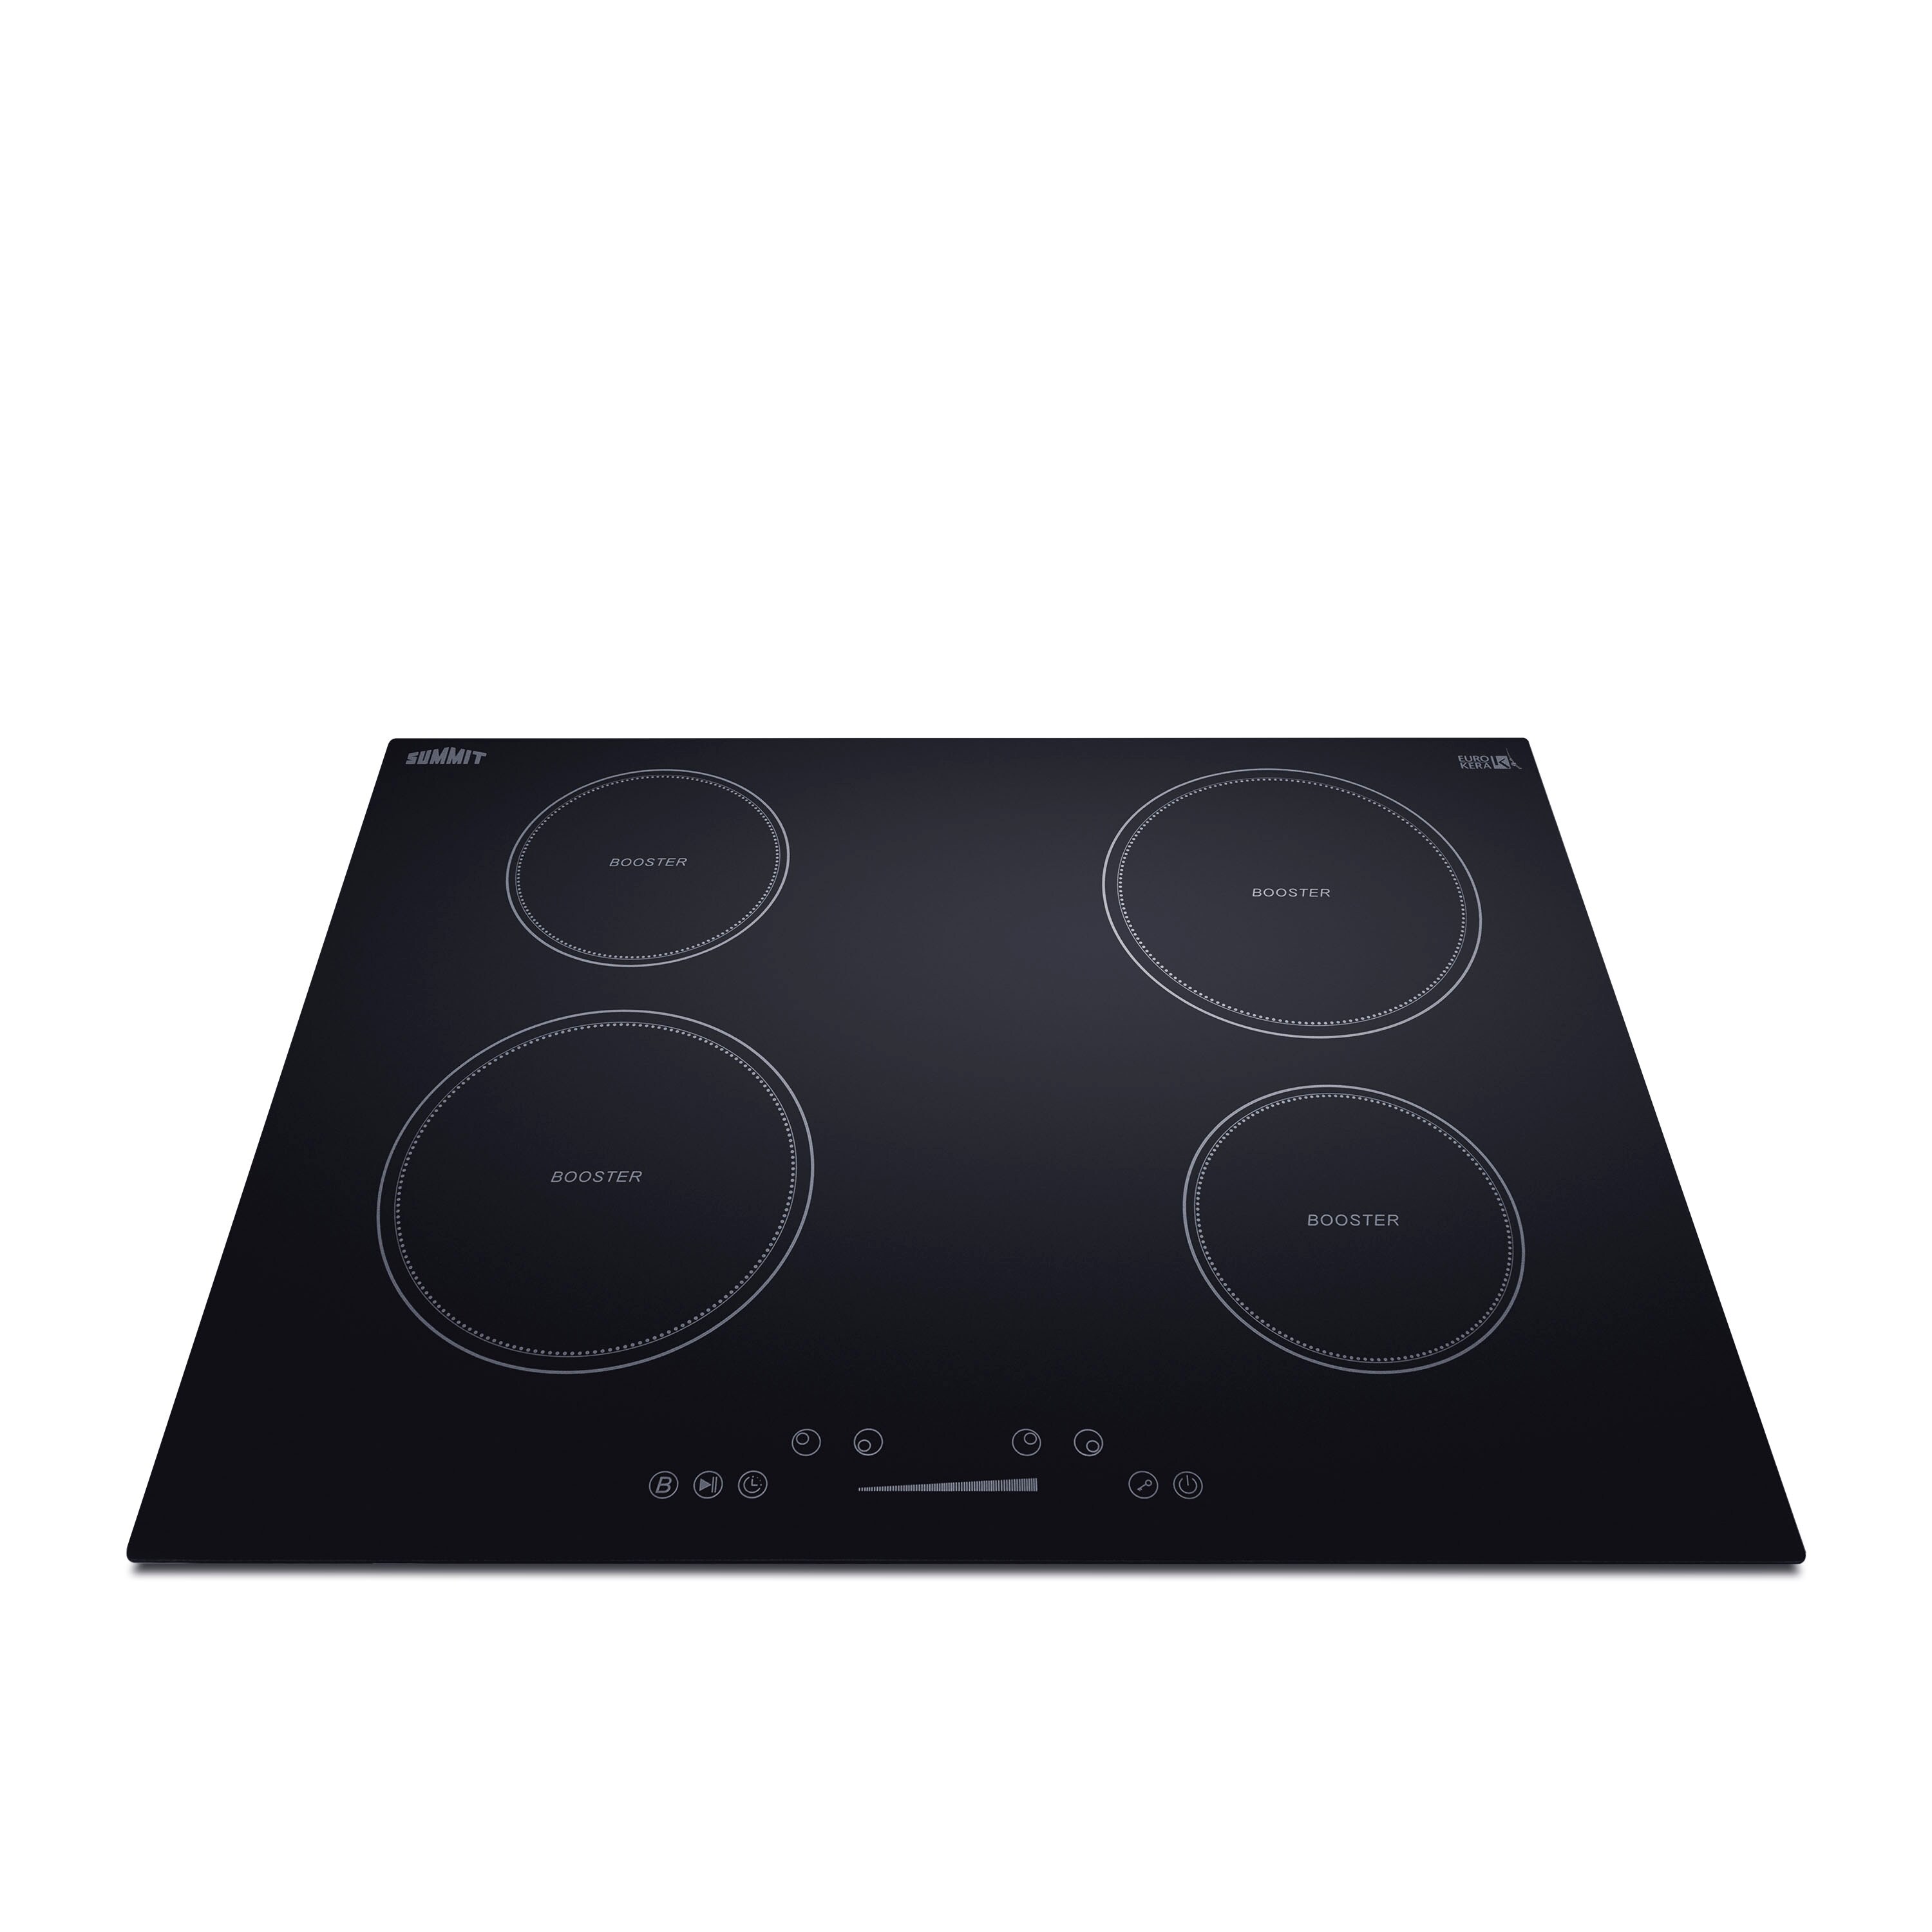 Double induction & radiant cooktop, SCP 4001BK